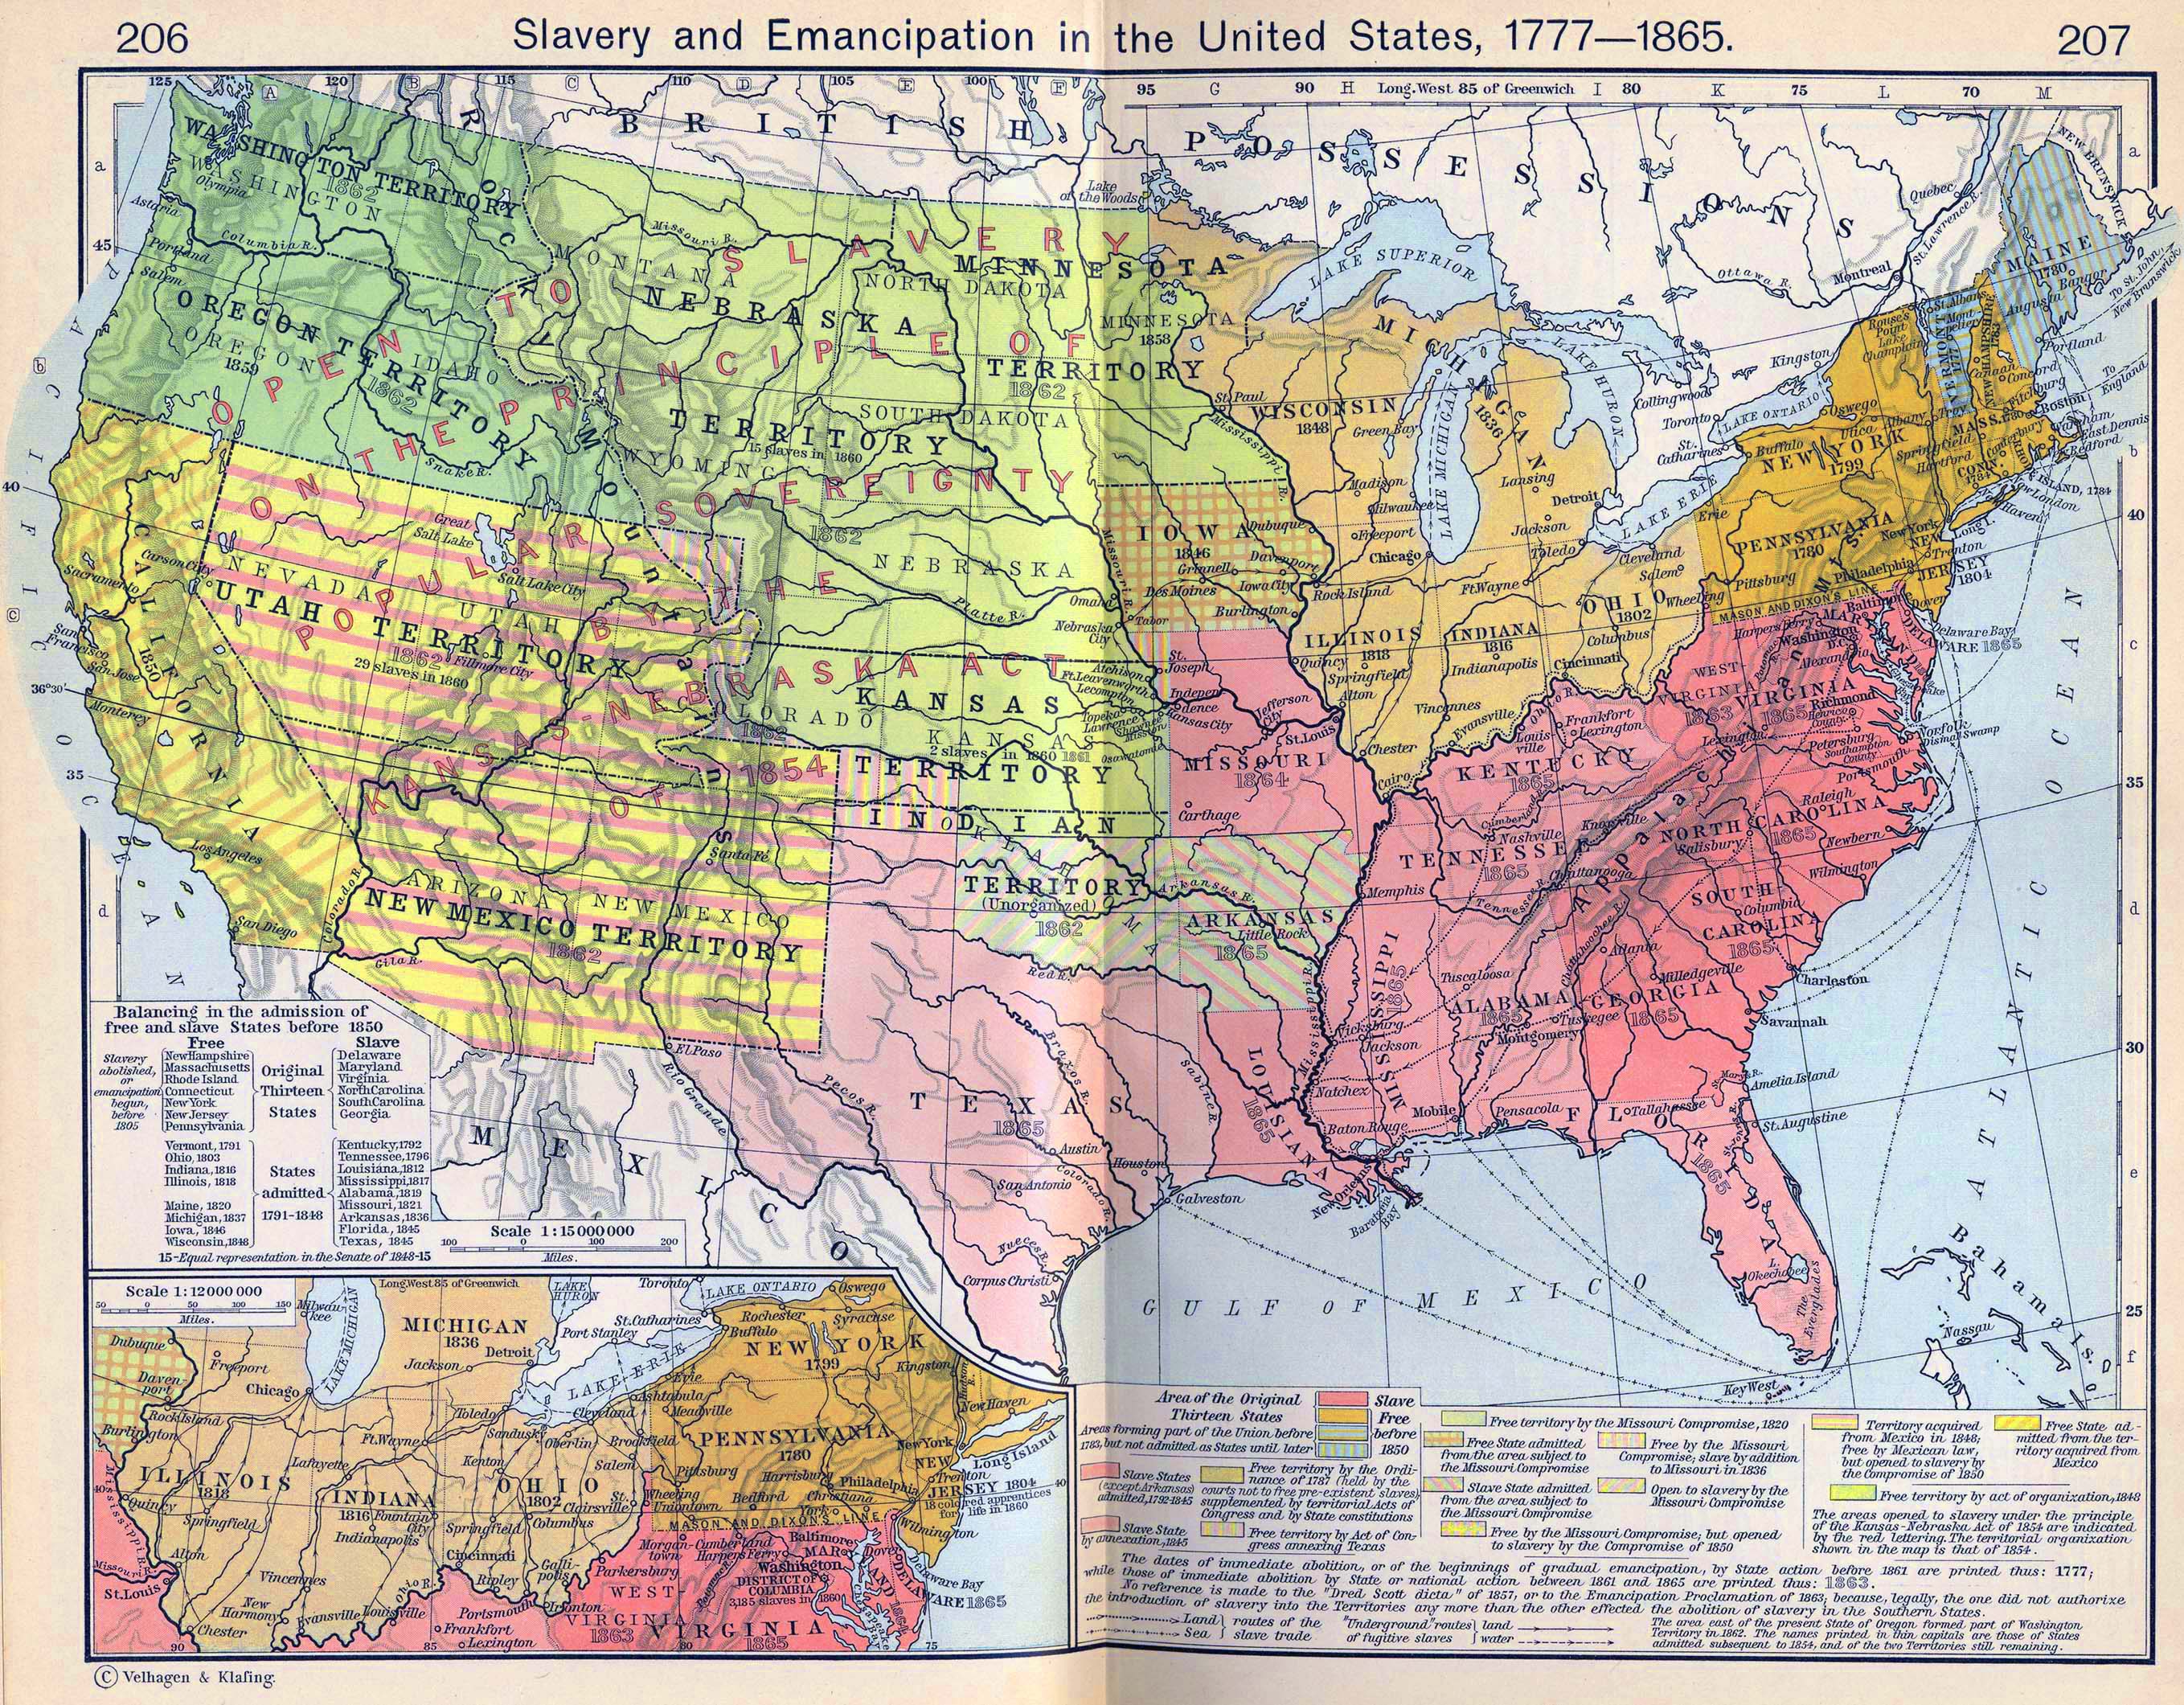 Map of the United States 1777-1865: Slavery and Emancipation